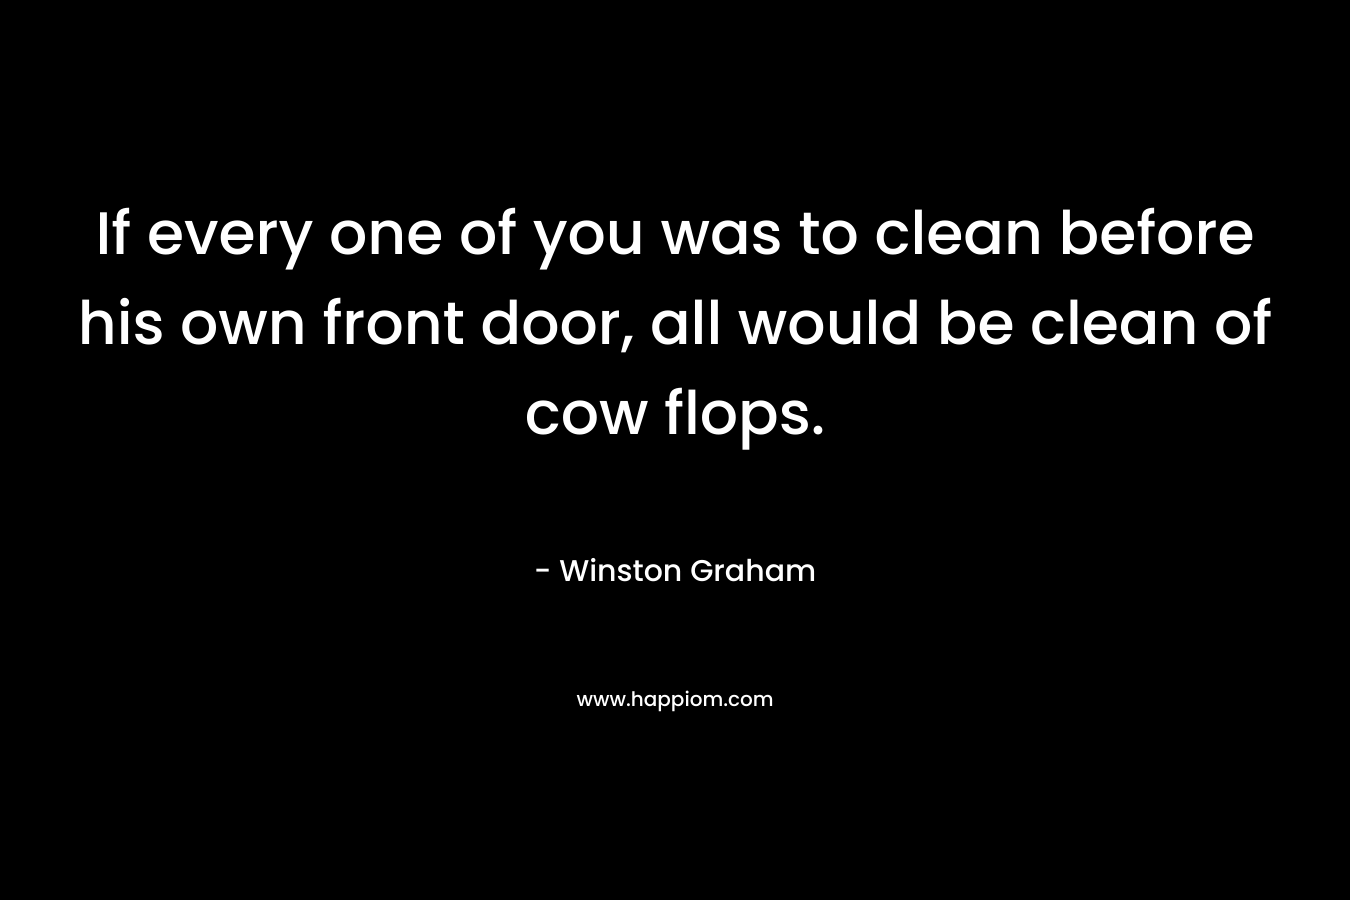 If every one of you was to clean before his own front door, all would be clean of cow flops.